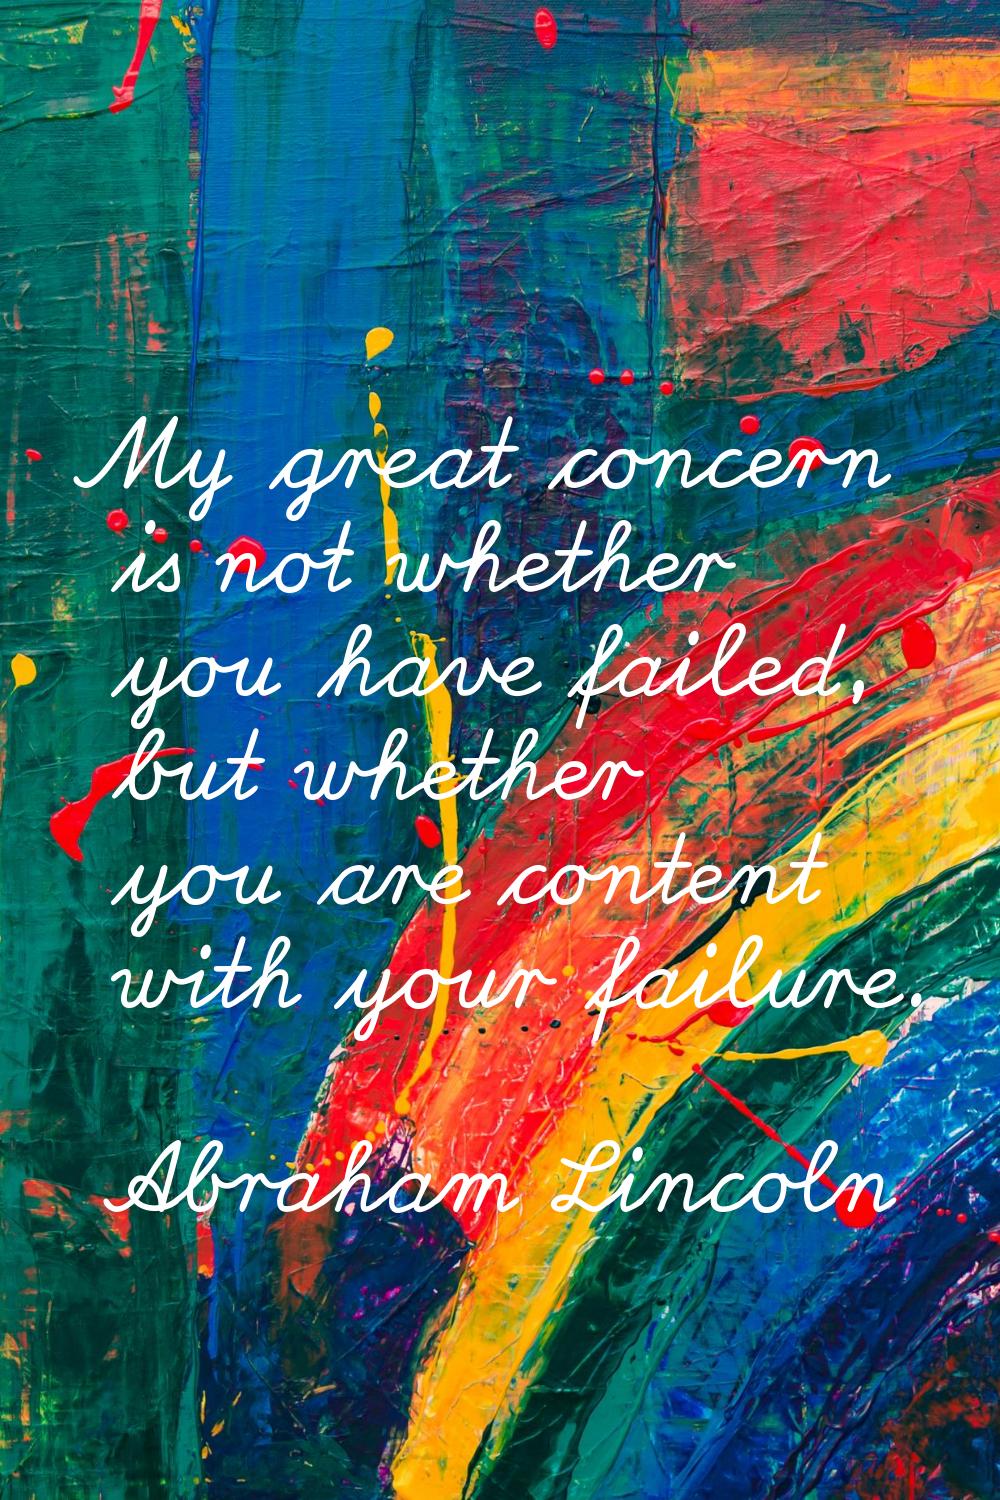 My great concern is not whether you have failed, but whether you are content with your failure.